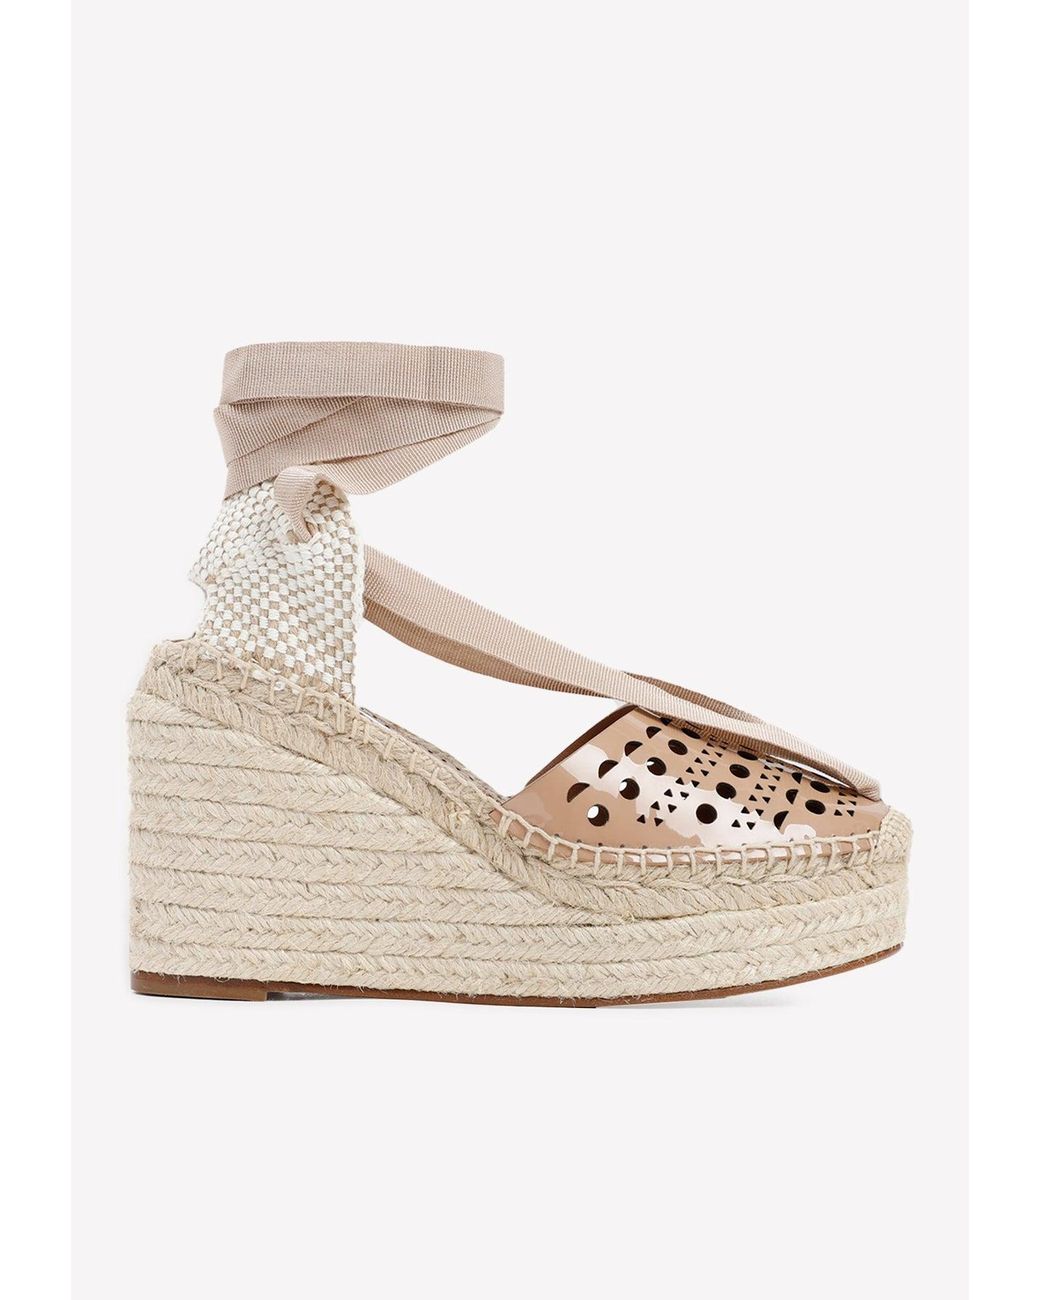 Alaïa Vienne 100 Calf Leather Espadrille Wedges in Natural | Lyst